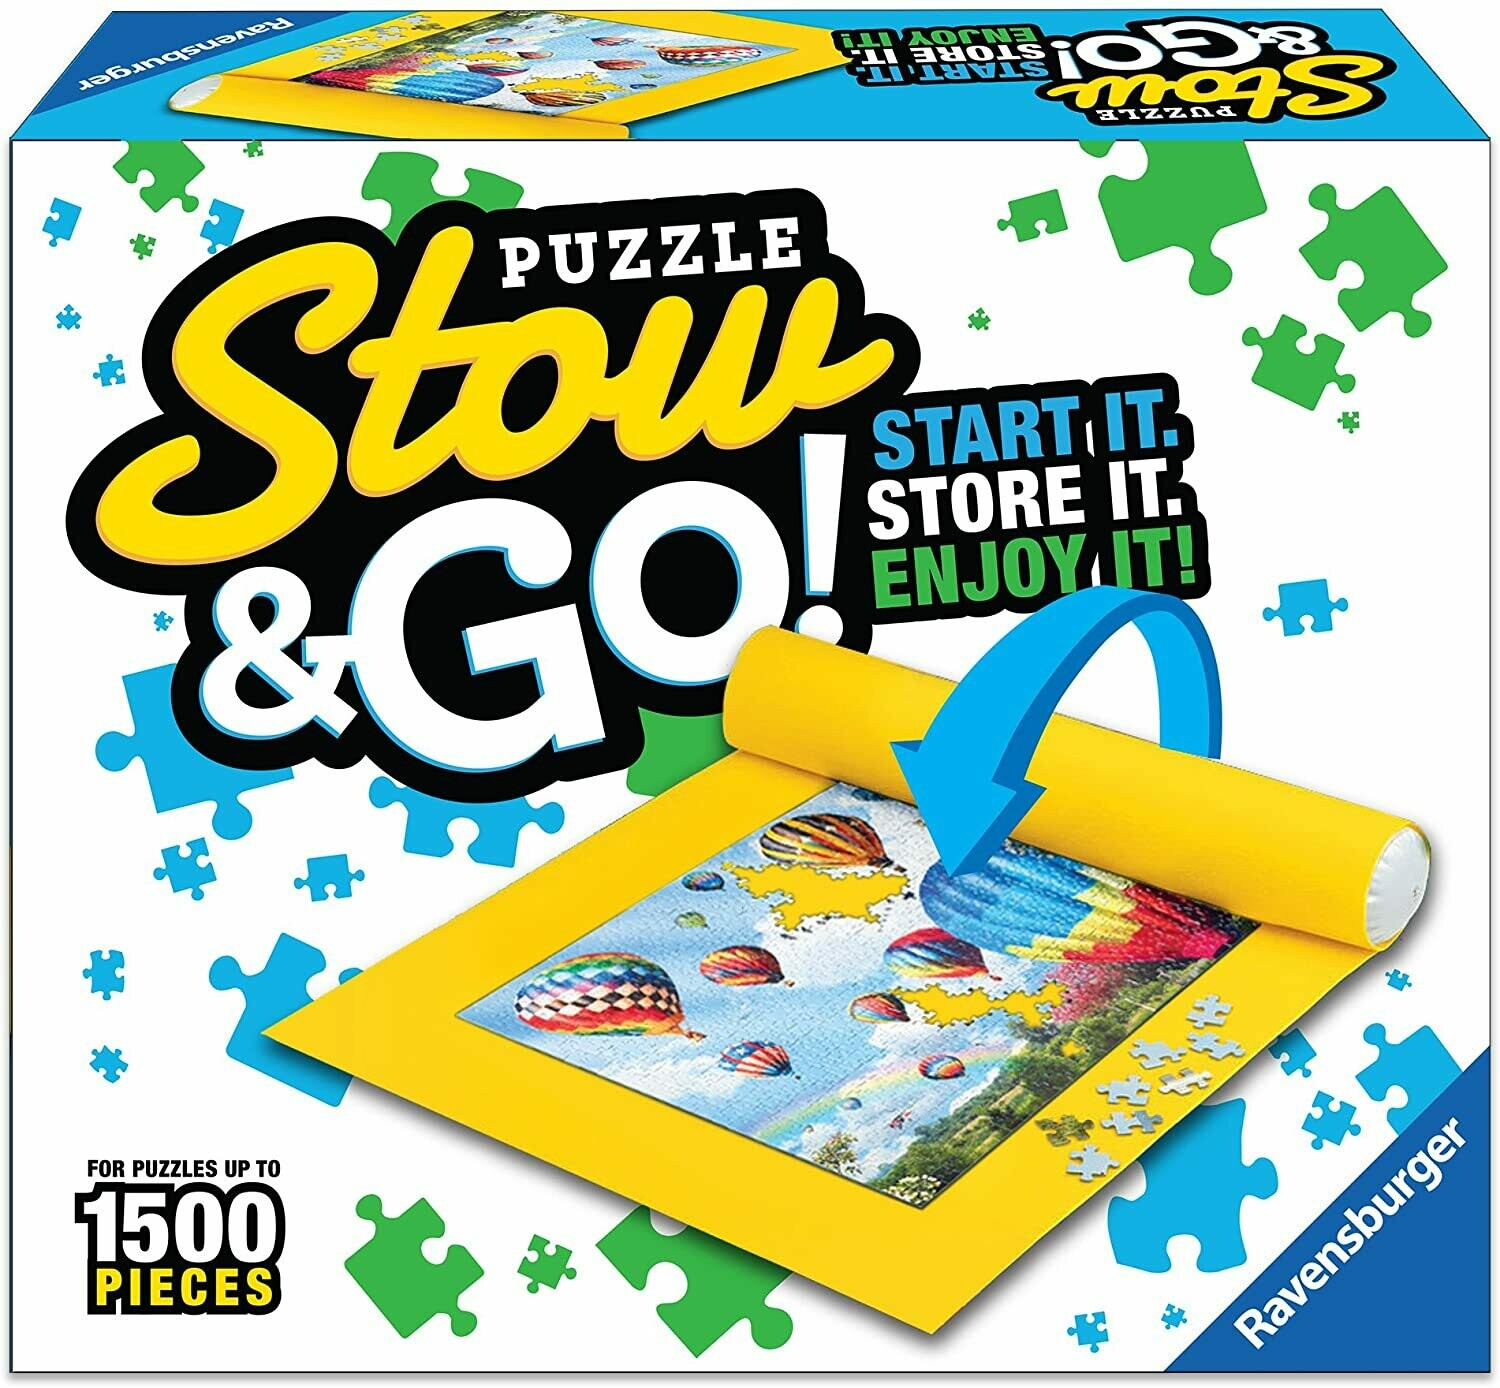 Stow and Go